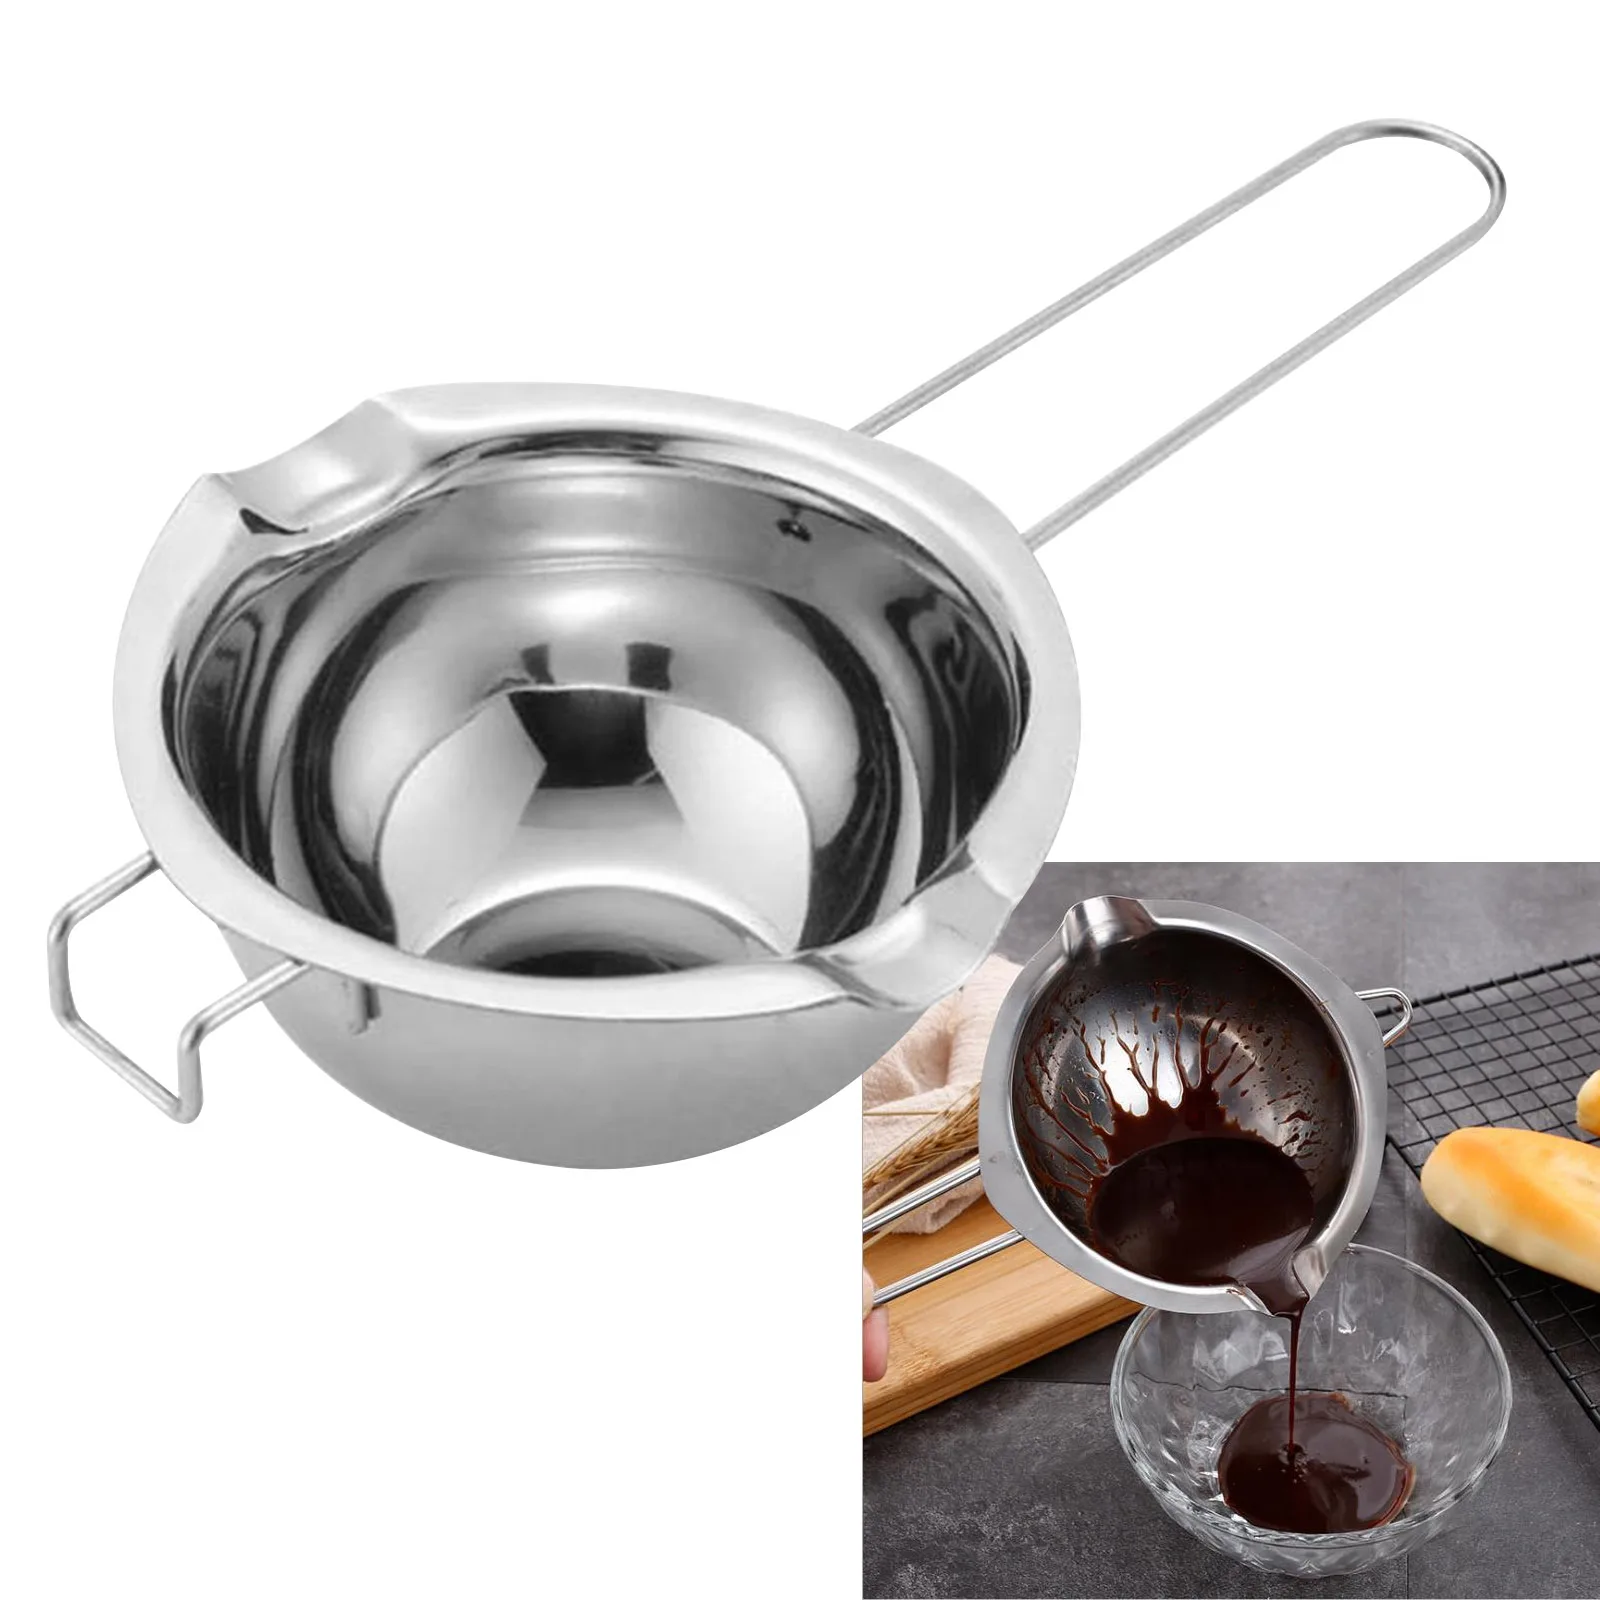 

Universal Melting Pot Chocolate Butter Milk Melting Pot Portable Stainless Steel Gadget Kitchen Cooking Accessories